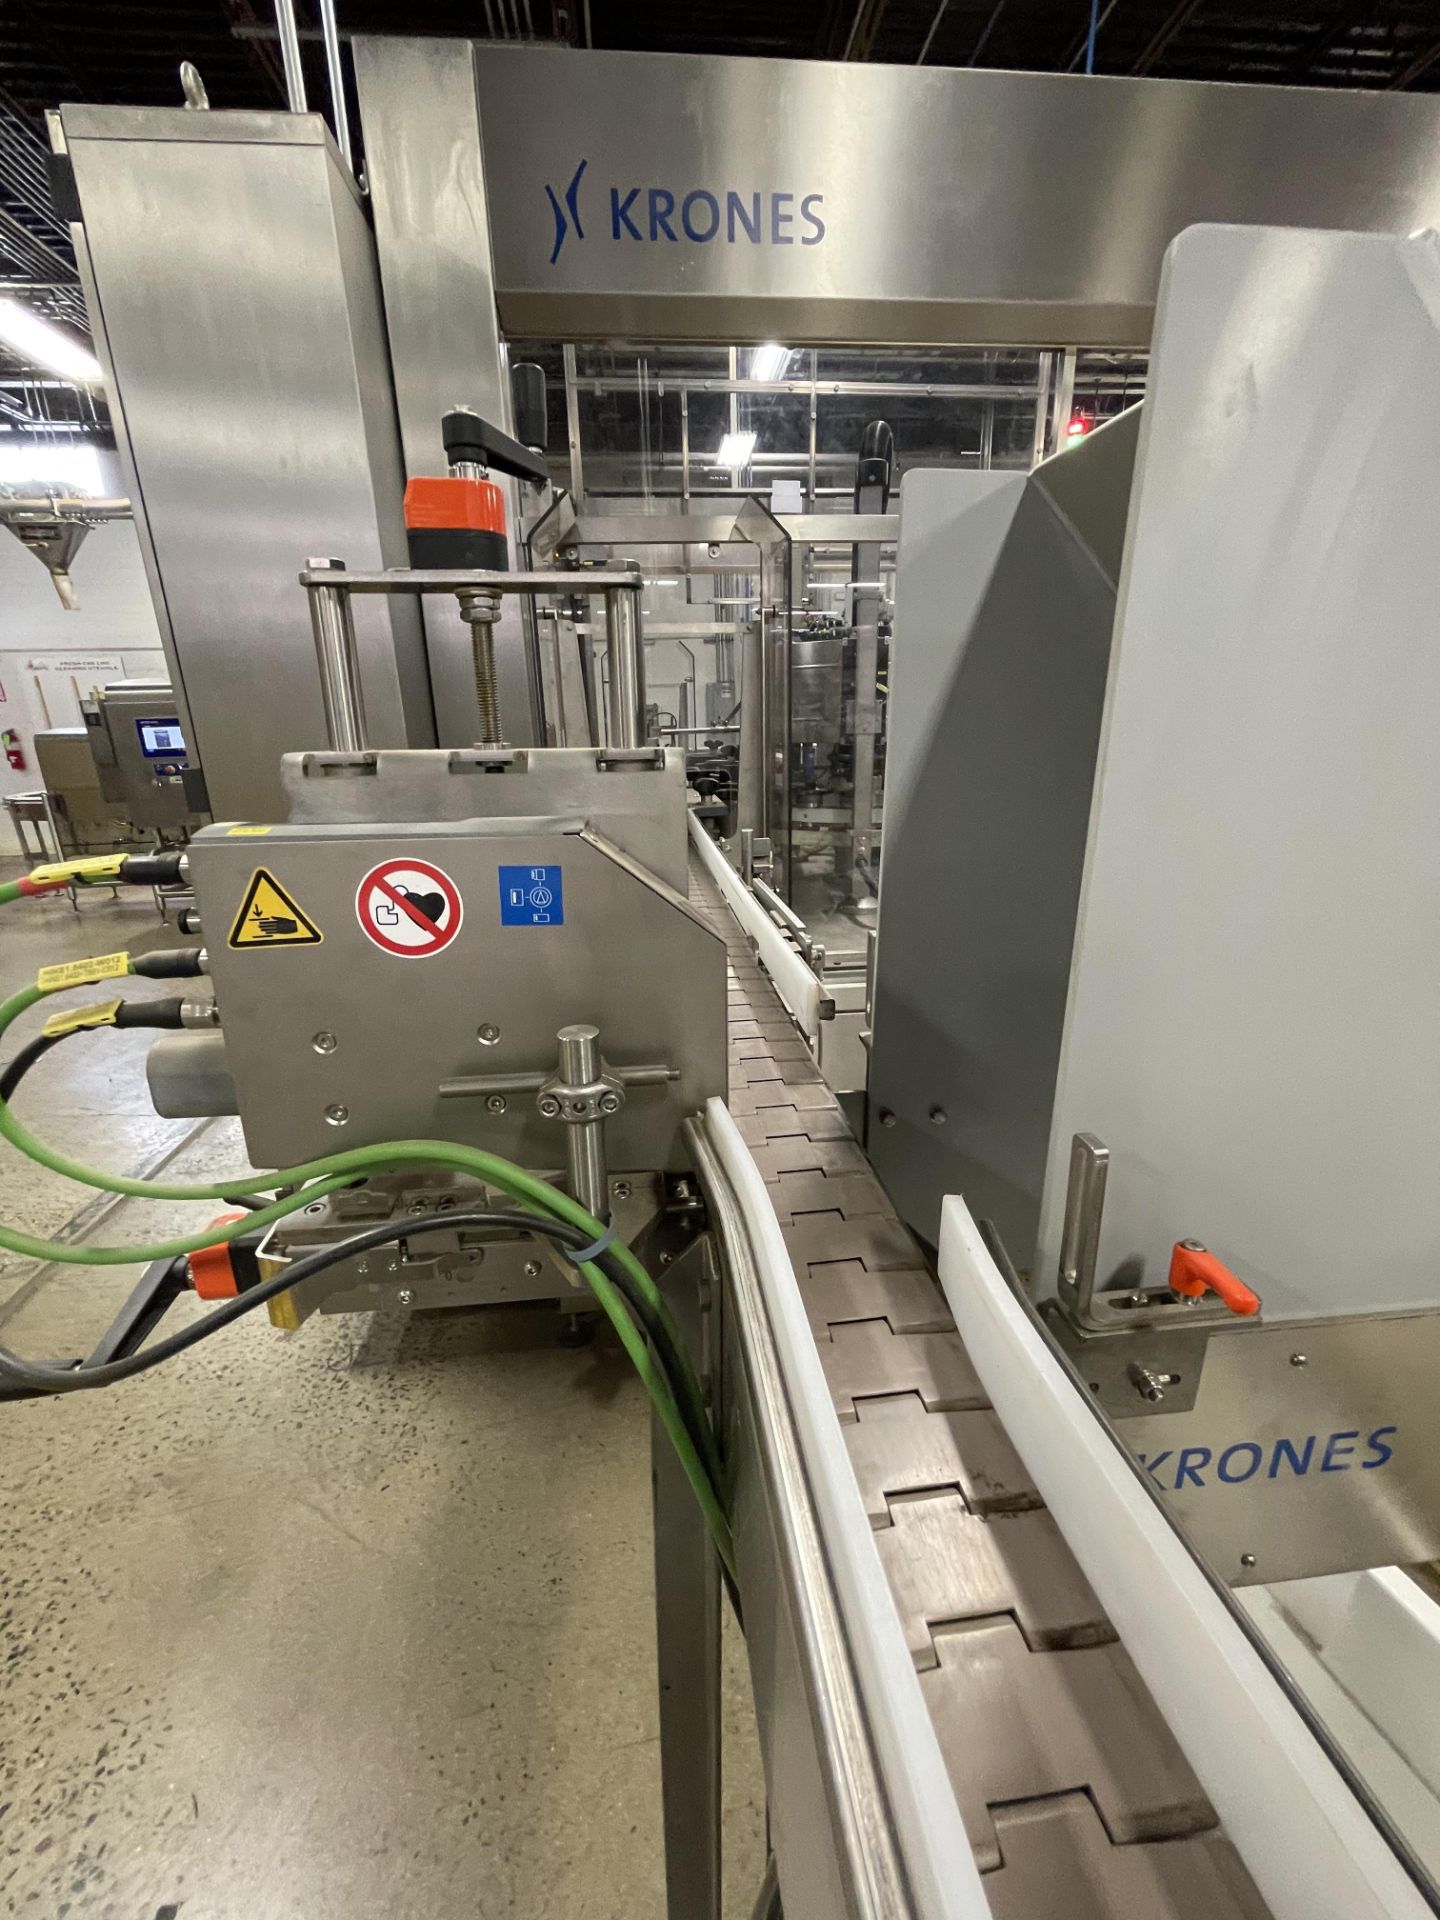 KRONES CHECKMAT INSPECTION SYSTEM, TYPE CHECKMAT 7.5 (2019 MFG) - Image 9 of 10